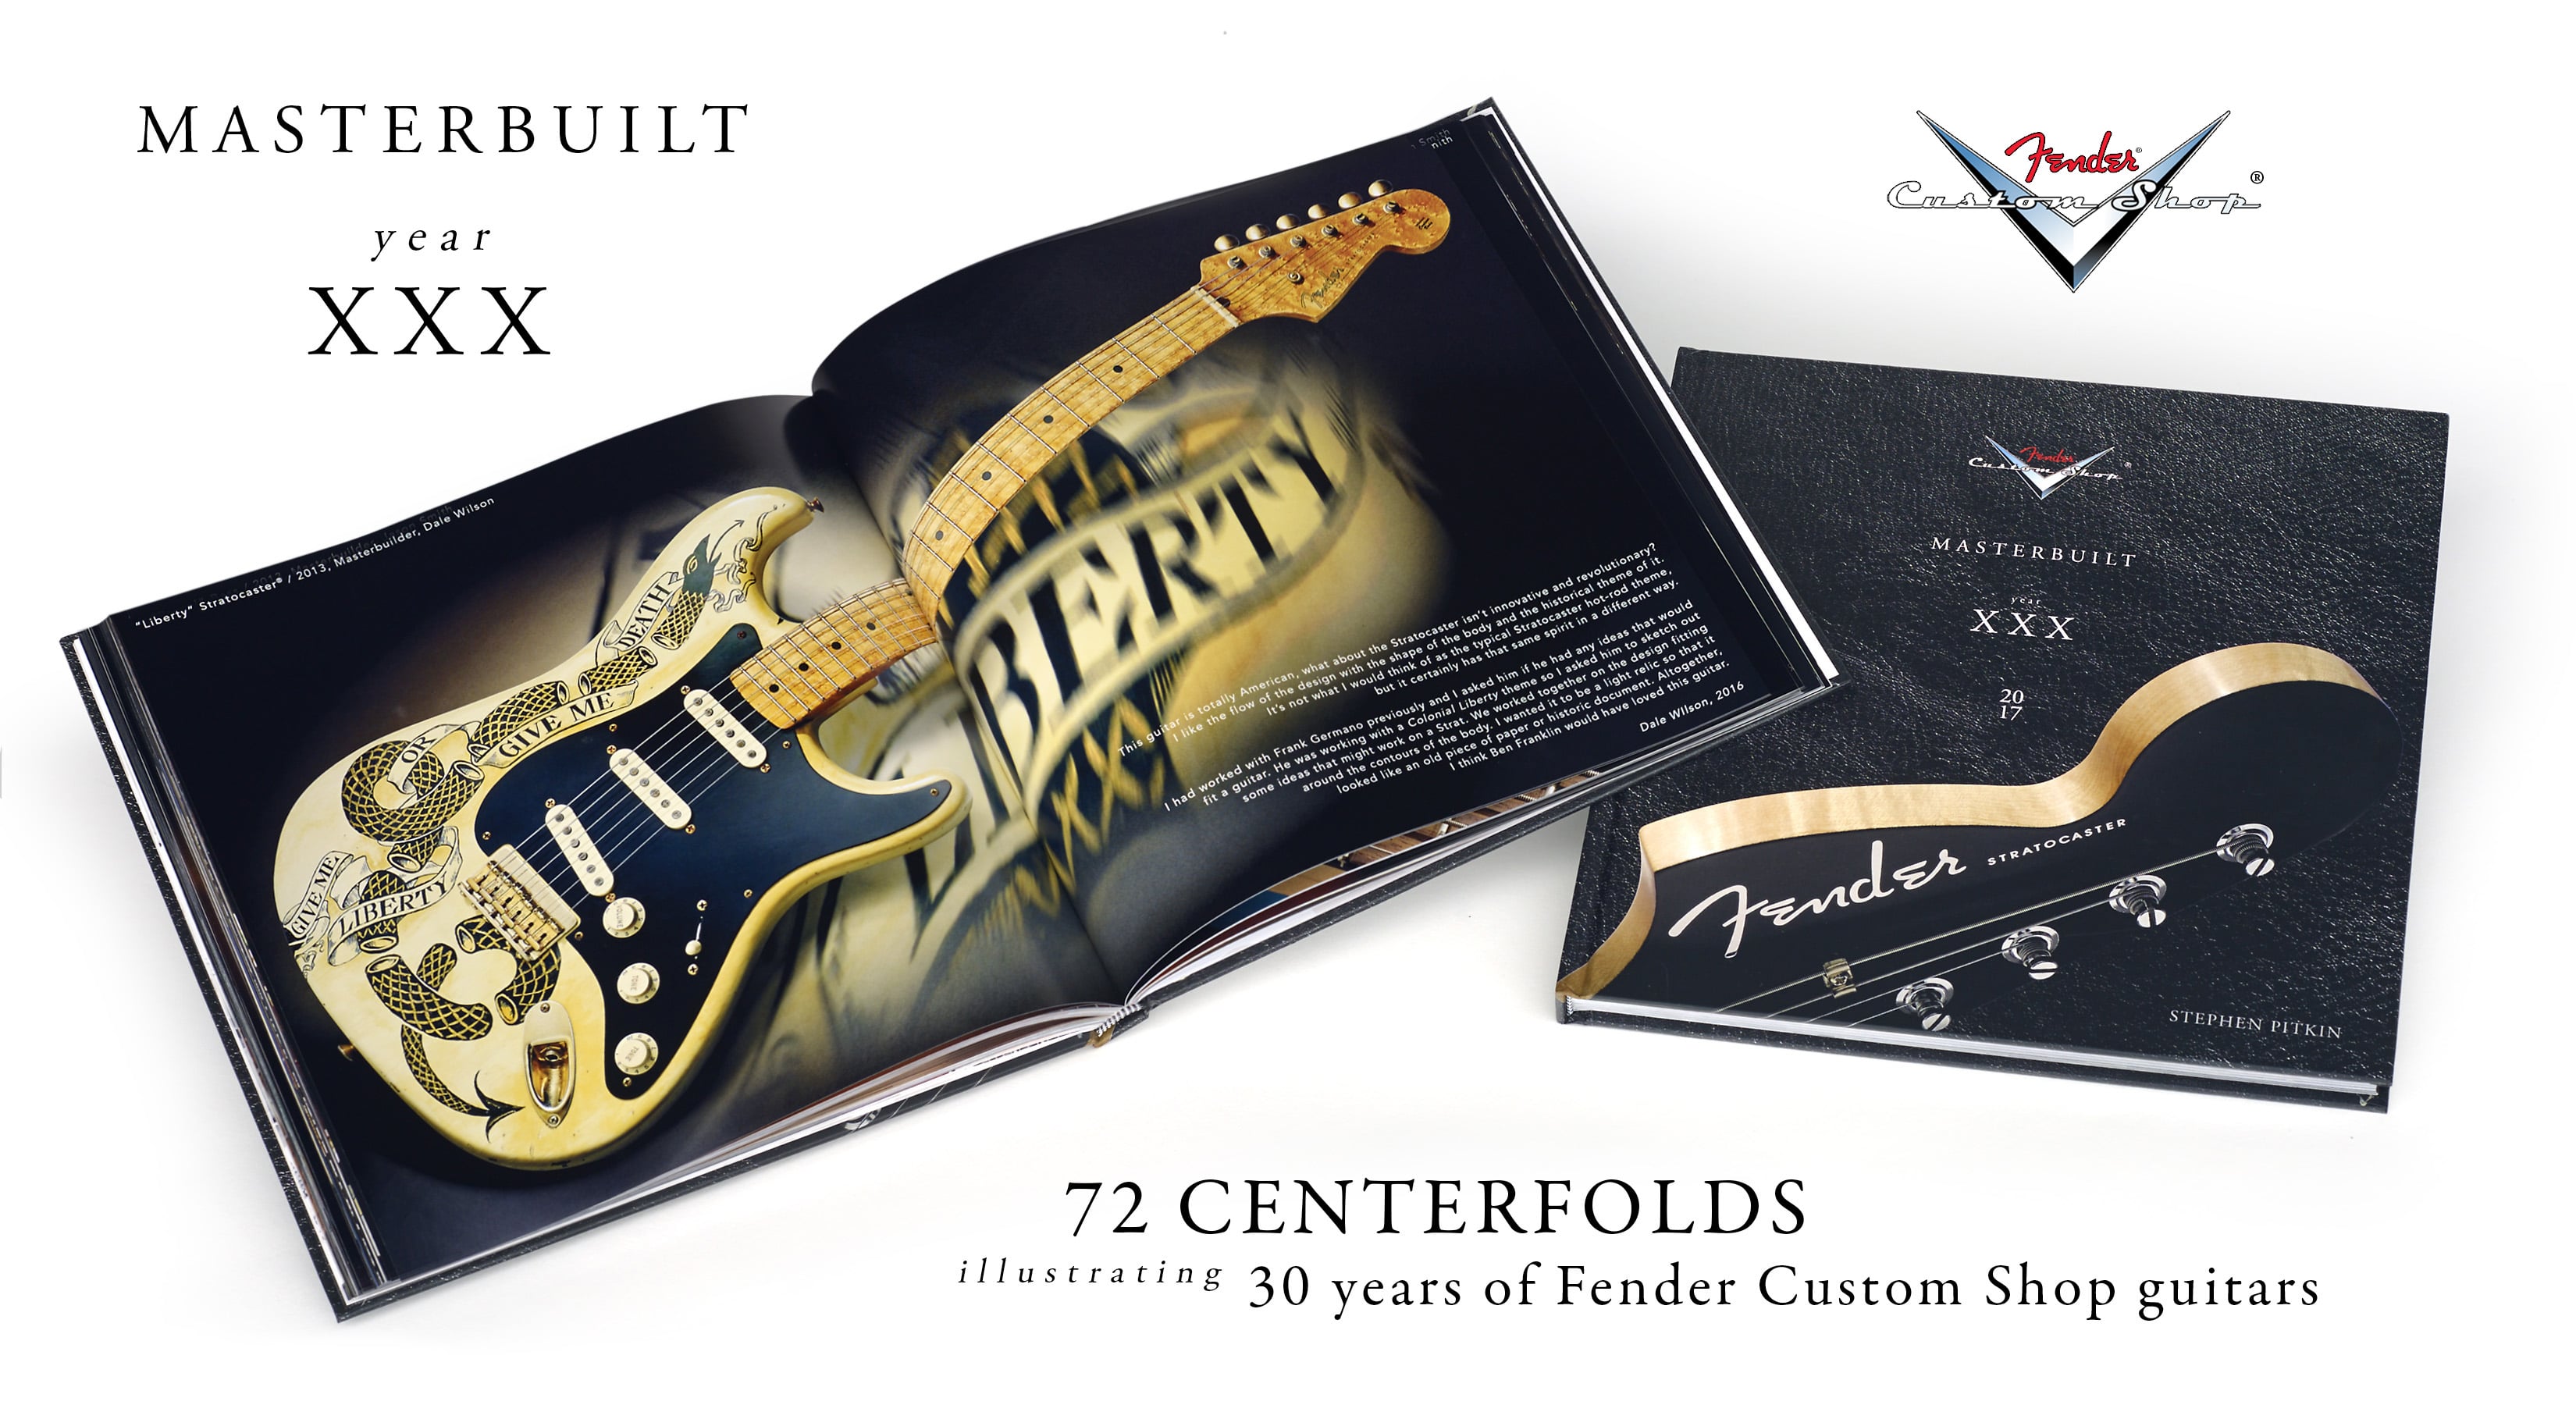 Fender Custom Shop At 30 Years- Book and Video documentary released